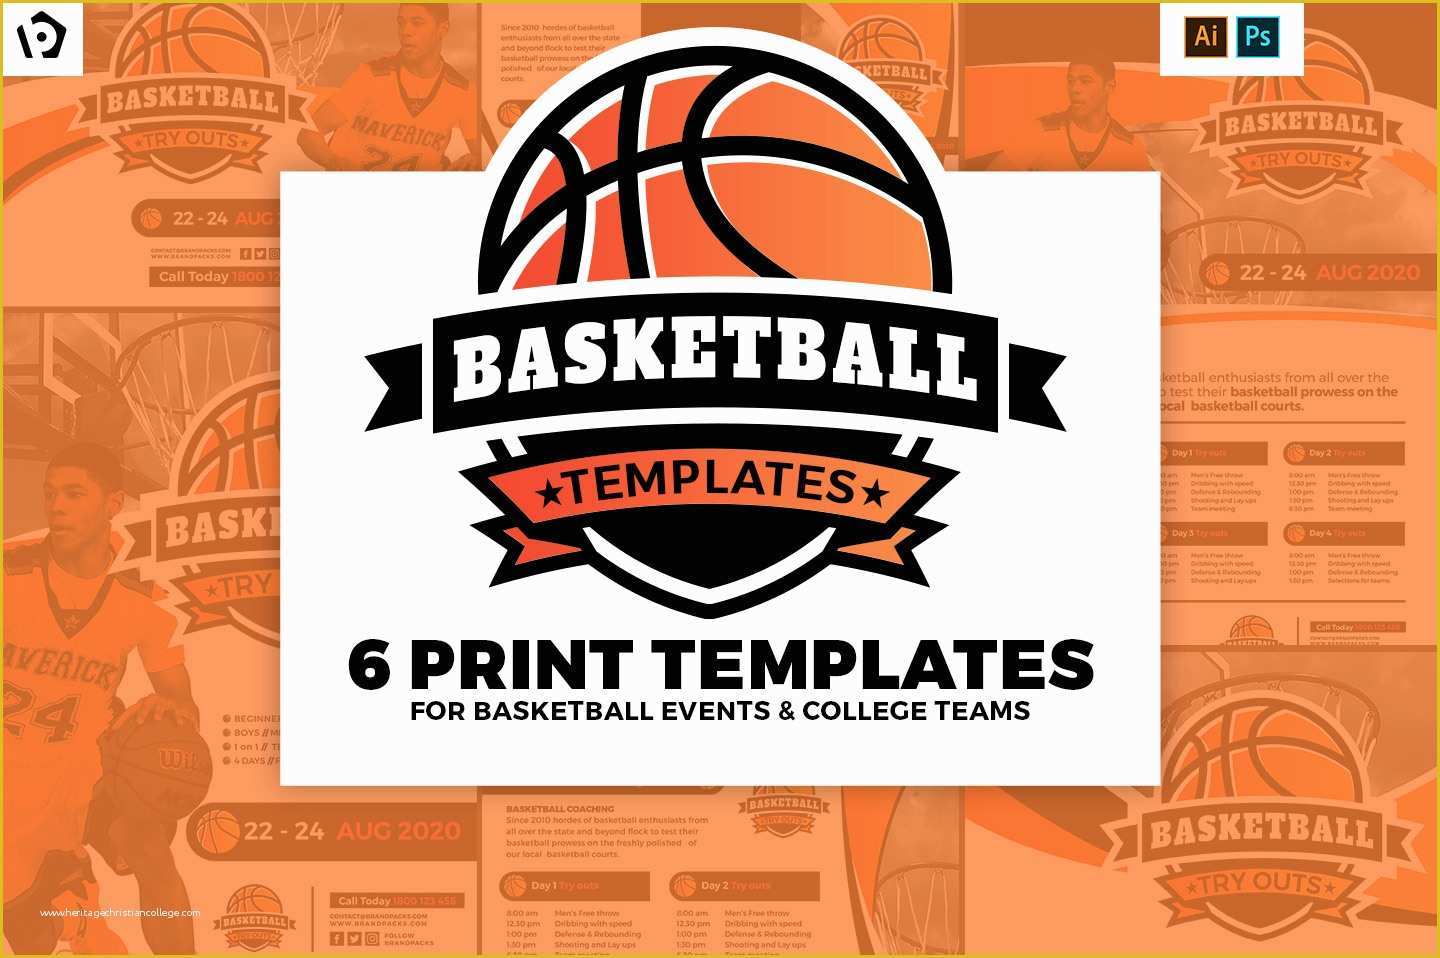 Free Basketball Photoshop Templates Of Basketball Templates Pack for Shop &amp; Illustrator